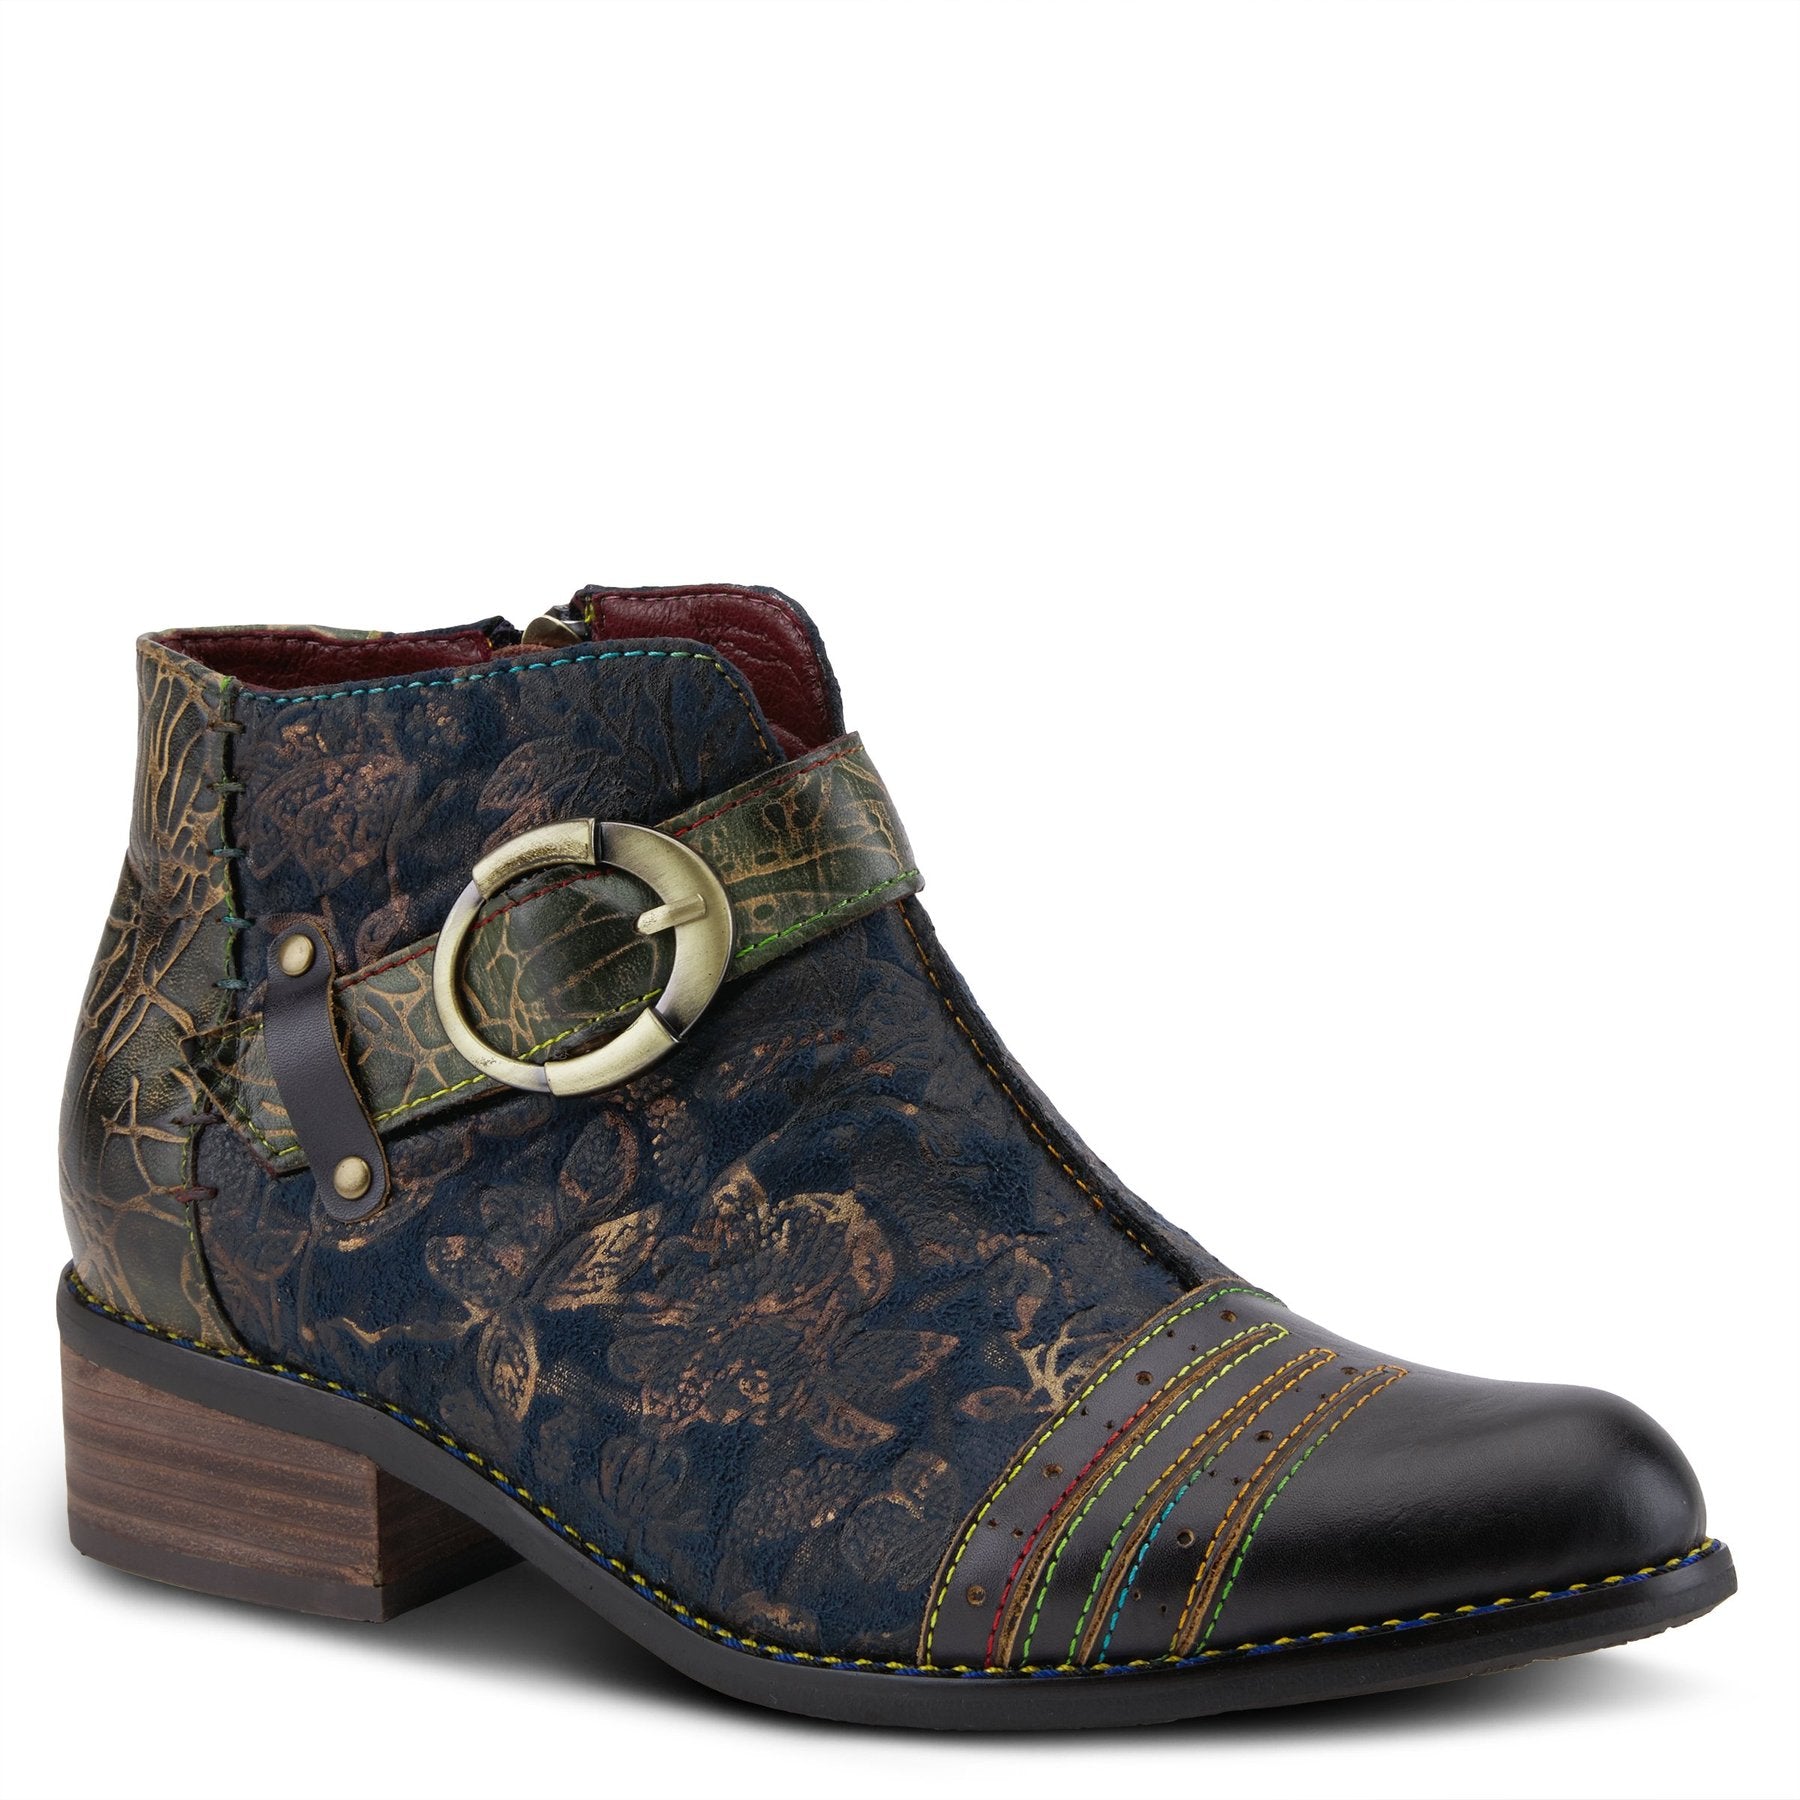 Outer front side view of the l'artiste georgiana boot. This boot is blue multi with a subtle gold floral print and a decorative buckle strap across the front.